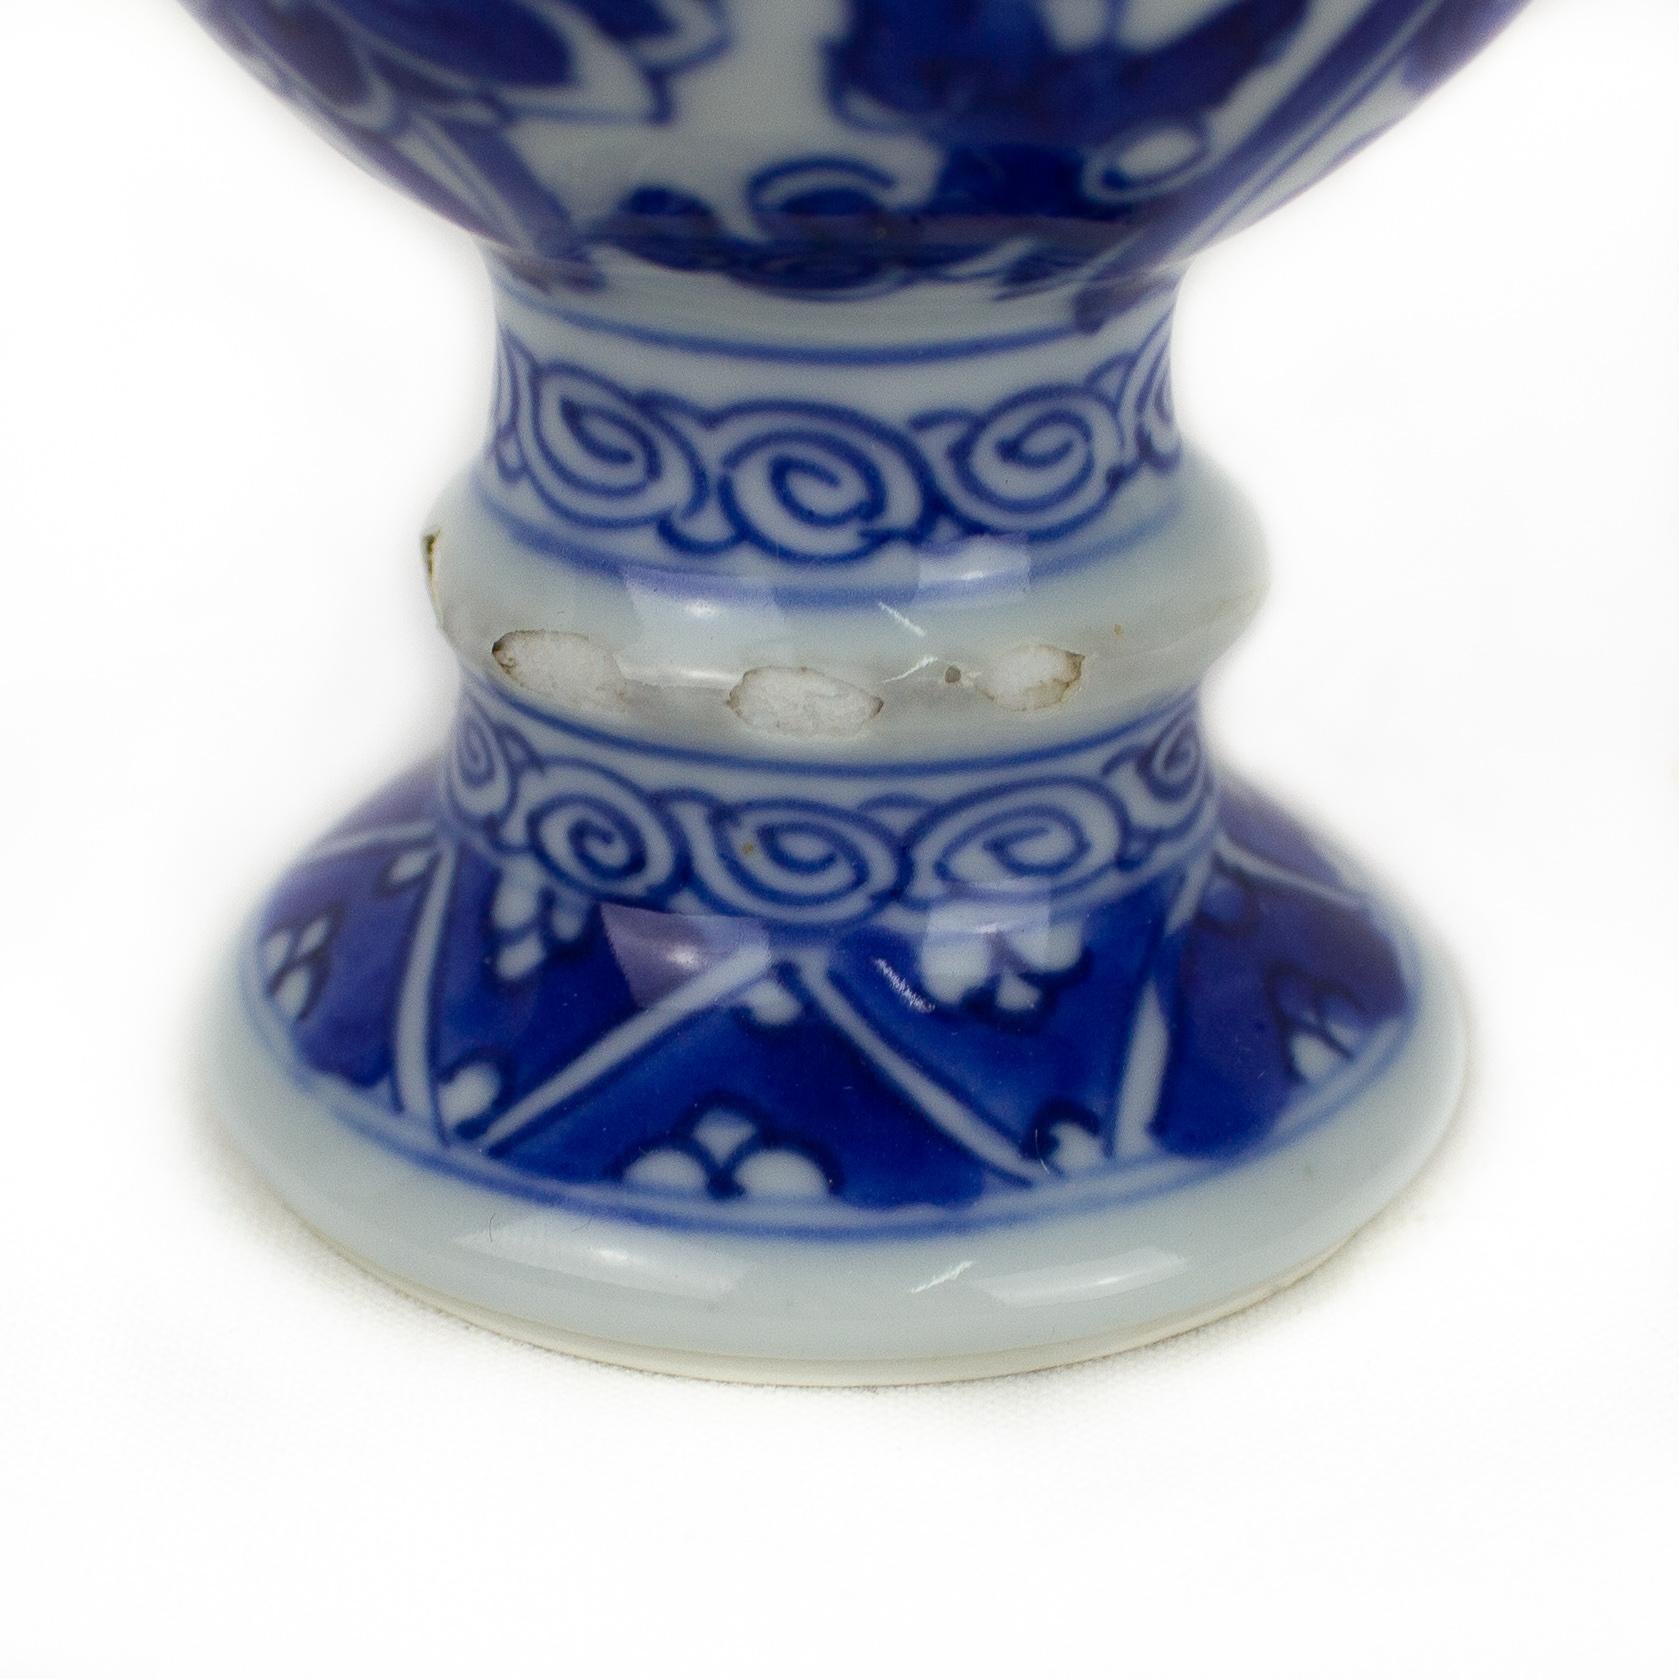 18th Century and Earlier Chinese Export Porcelain Small Pot with Cover, Kangxi, ‘1662-1722’